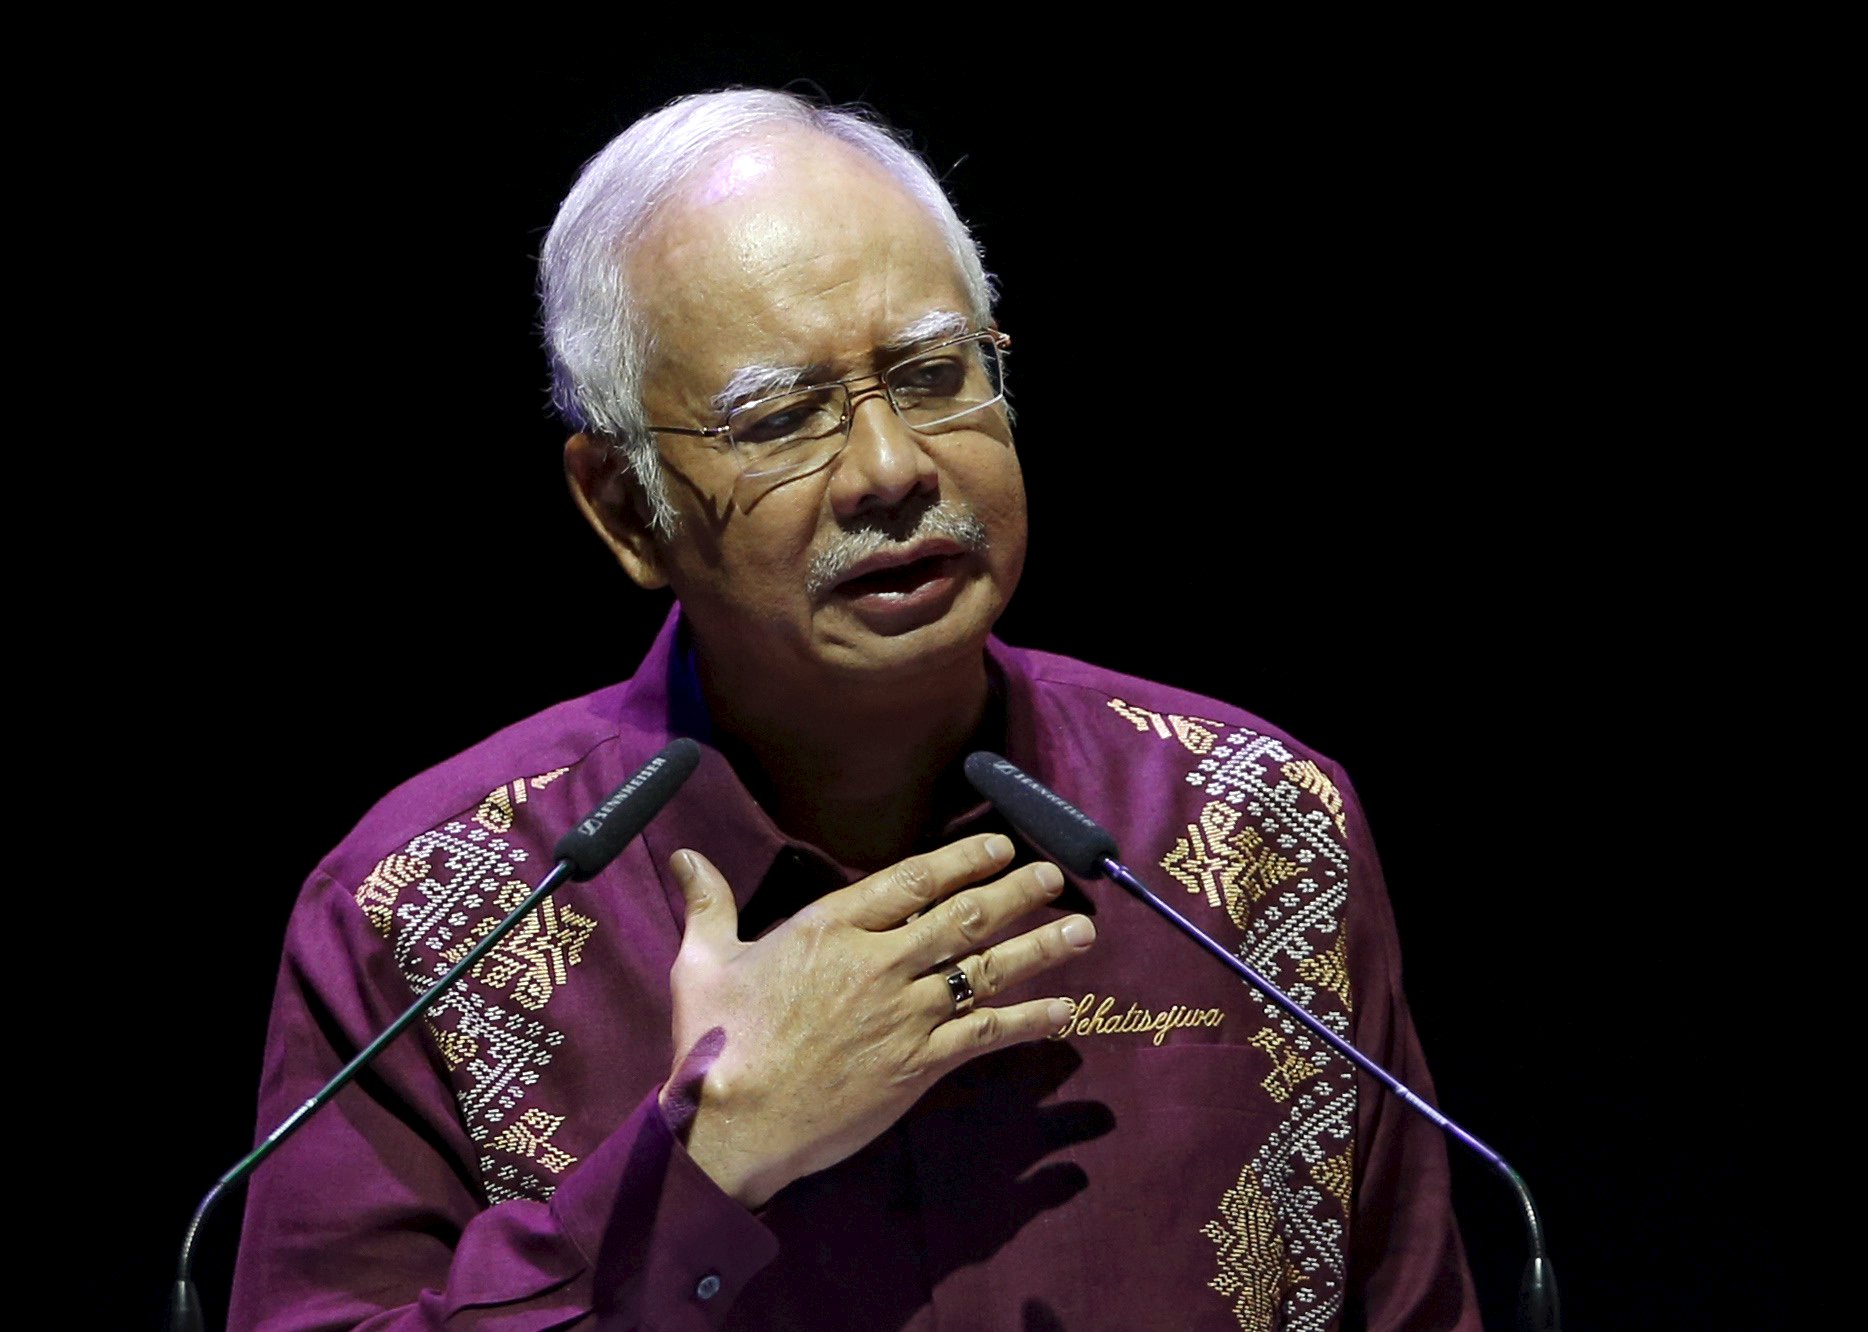 Malaysia's Prime Minister Najib Razak addresses the nation in a National Day message in the capital city of Kuala Lumpur in this August 30, 2015 file photo. Malaysia's Prime Minister Najib Razak faces the toughest test of his political career so far when parliament reconvenes next week, with the leader facing questions from a growing number of establishment figures about his alleged role in a graft scandal at the state investment fund. REUTERS/Edgar Su/Files